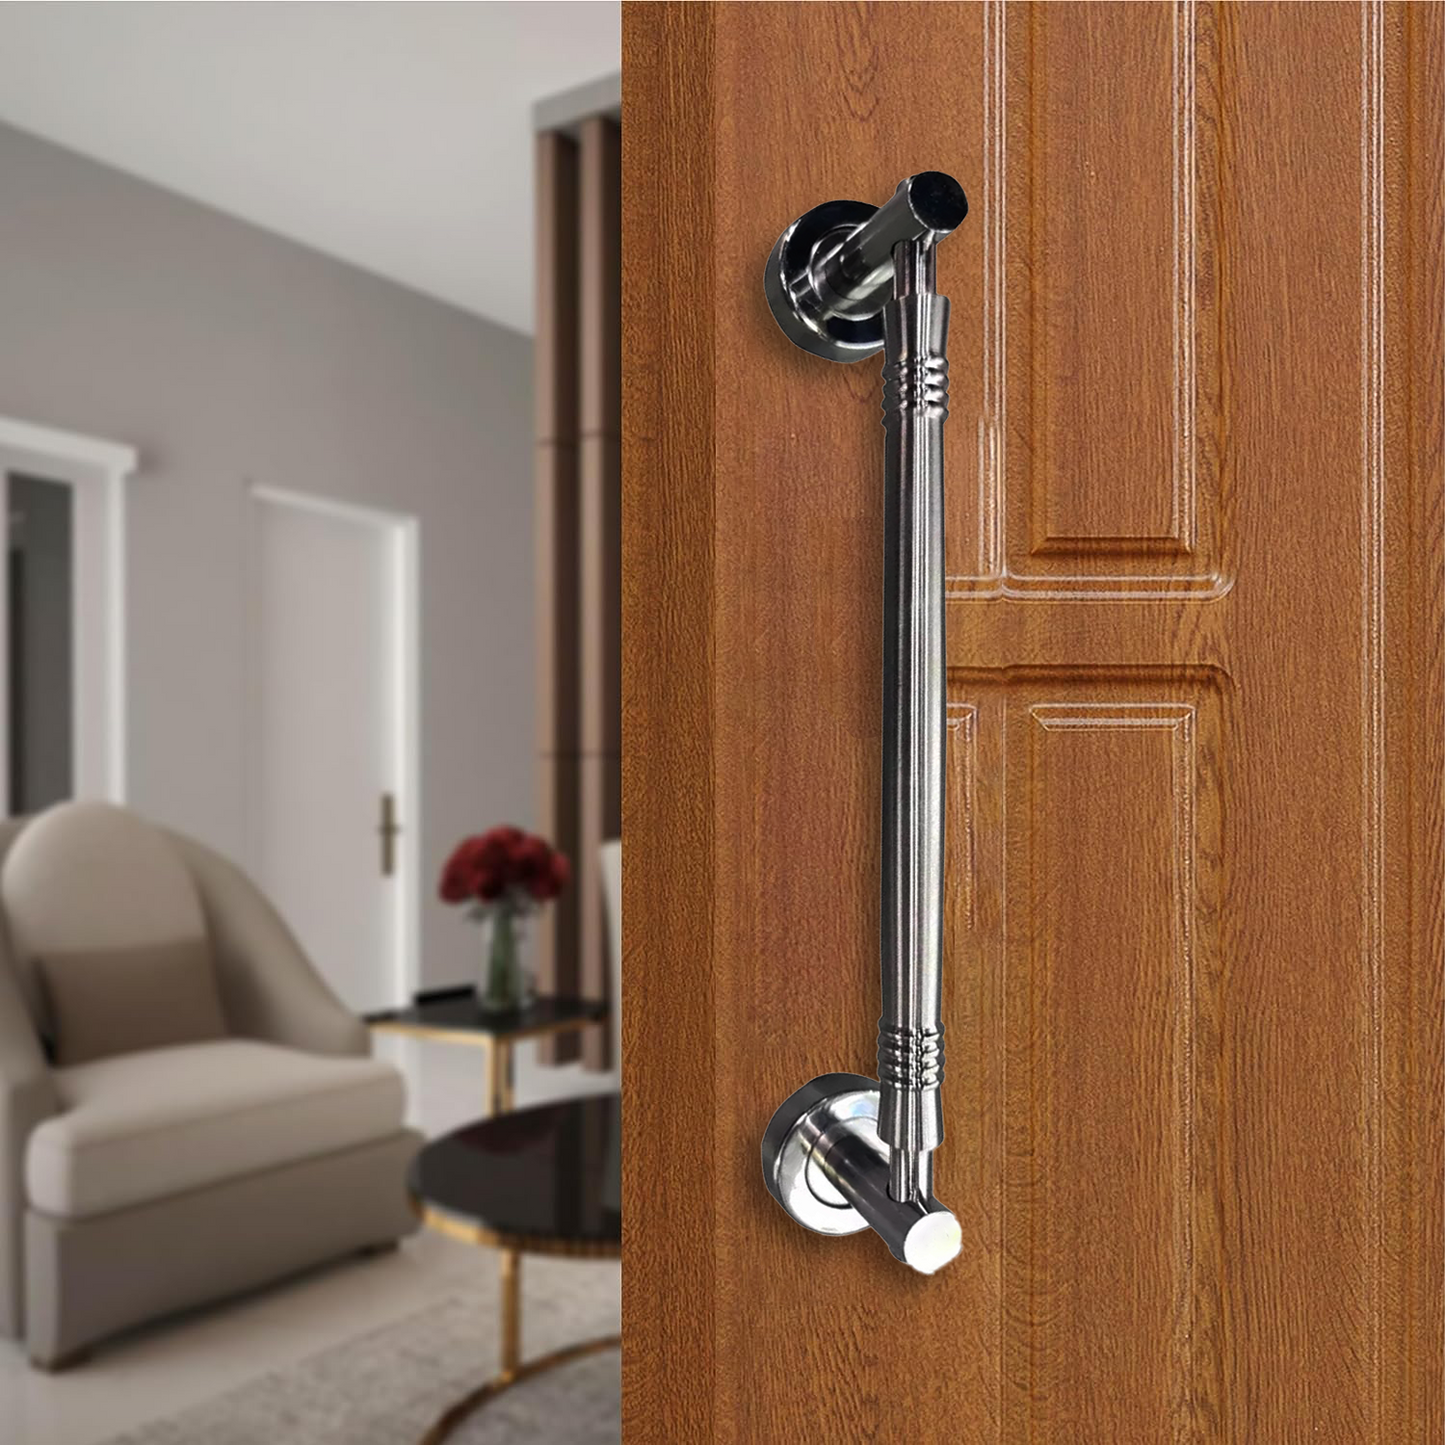 Aranze DS_56_300mm 12 inch Main Door/Pull Handle, Pack of 1, S.S. and Satin Finish